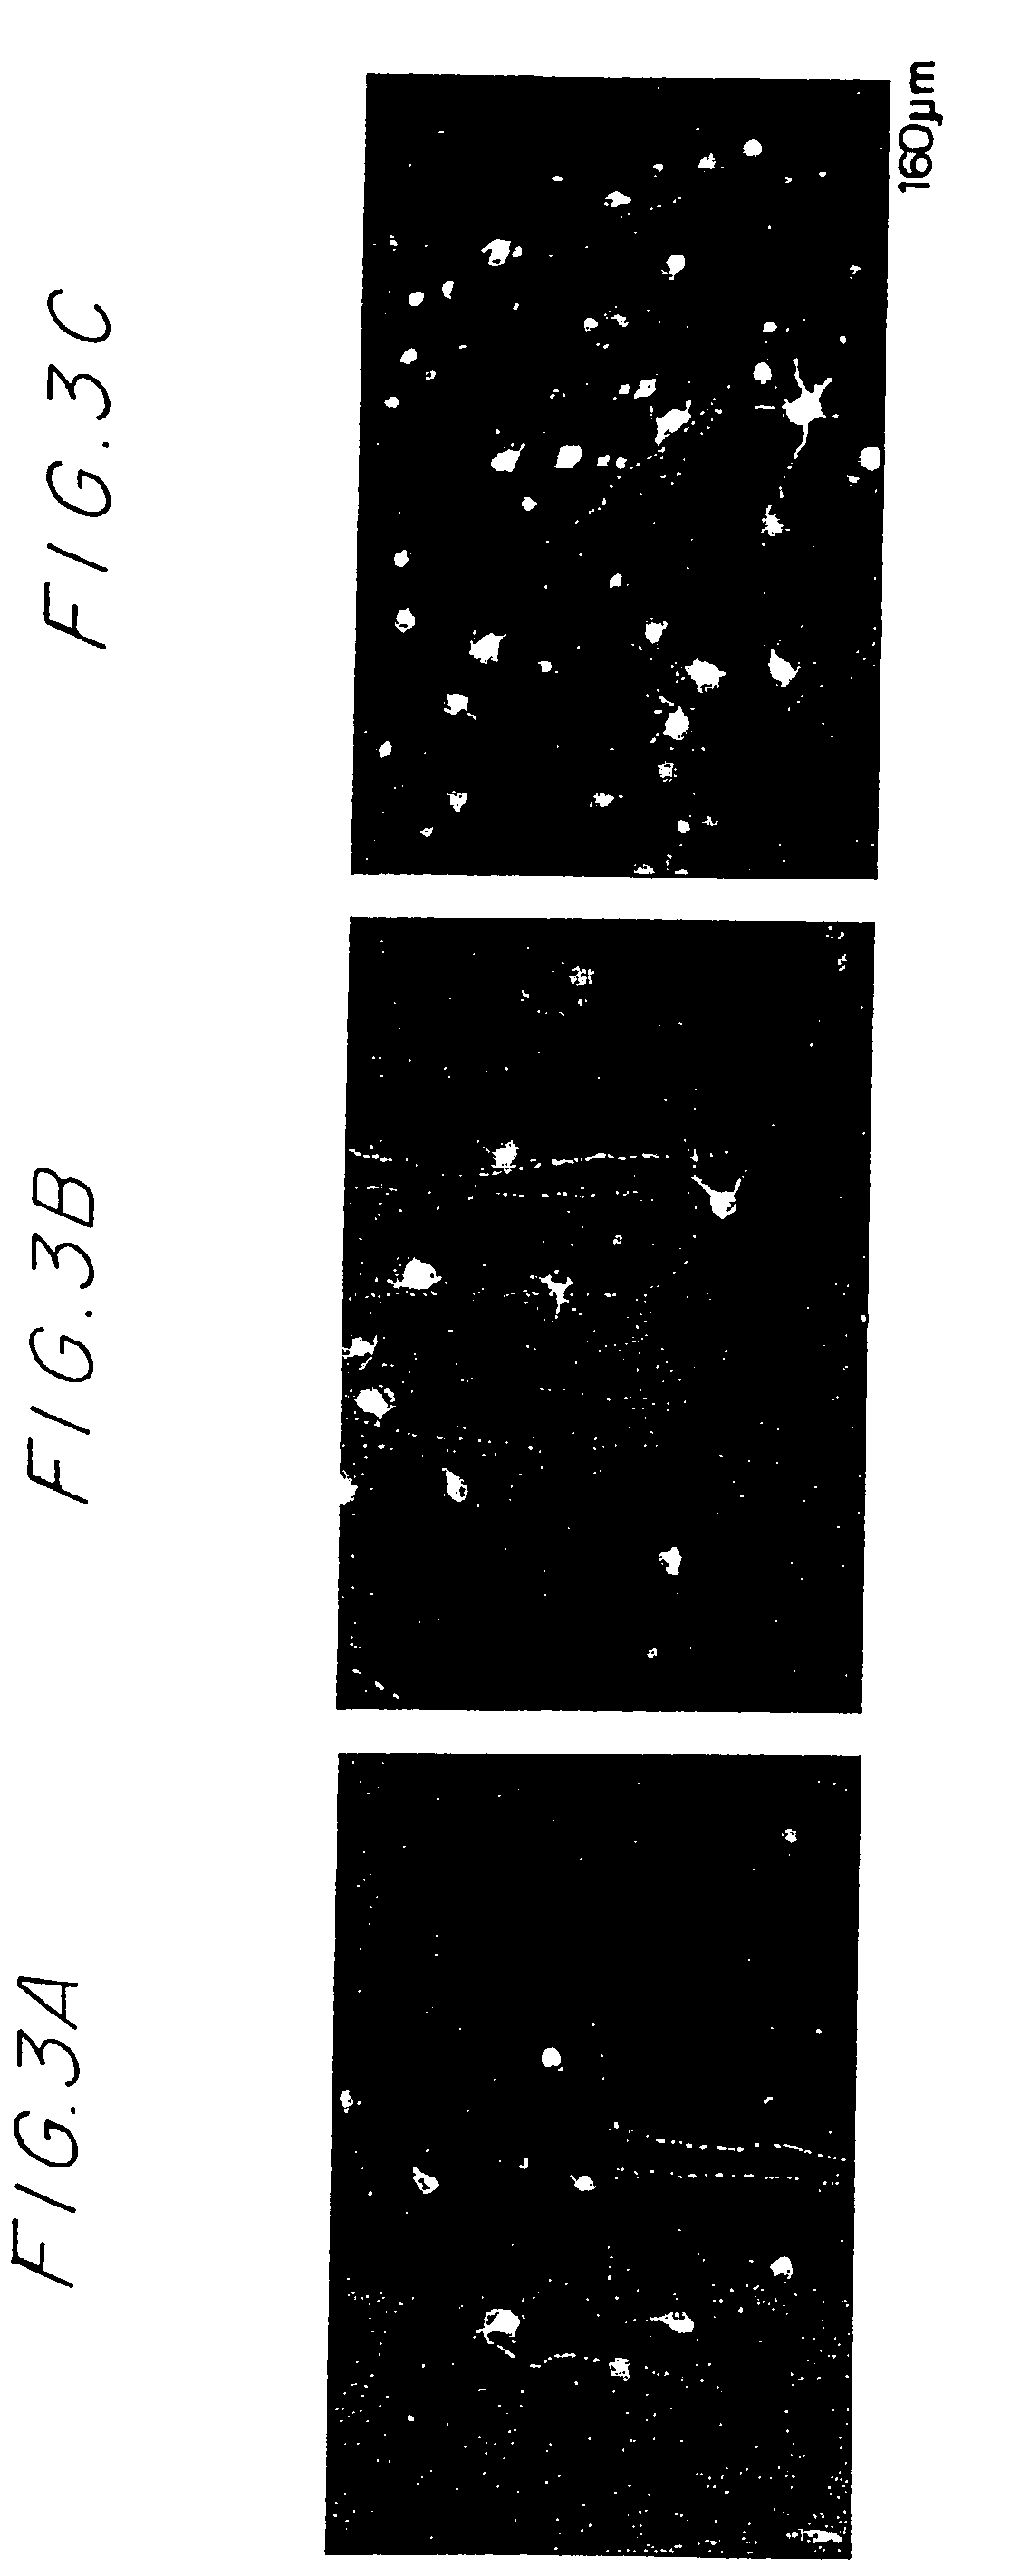 Method for reducing neuronal degeneration so as to ameliorate the effects of injury or disease